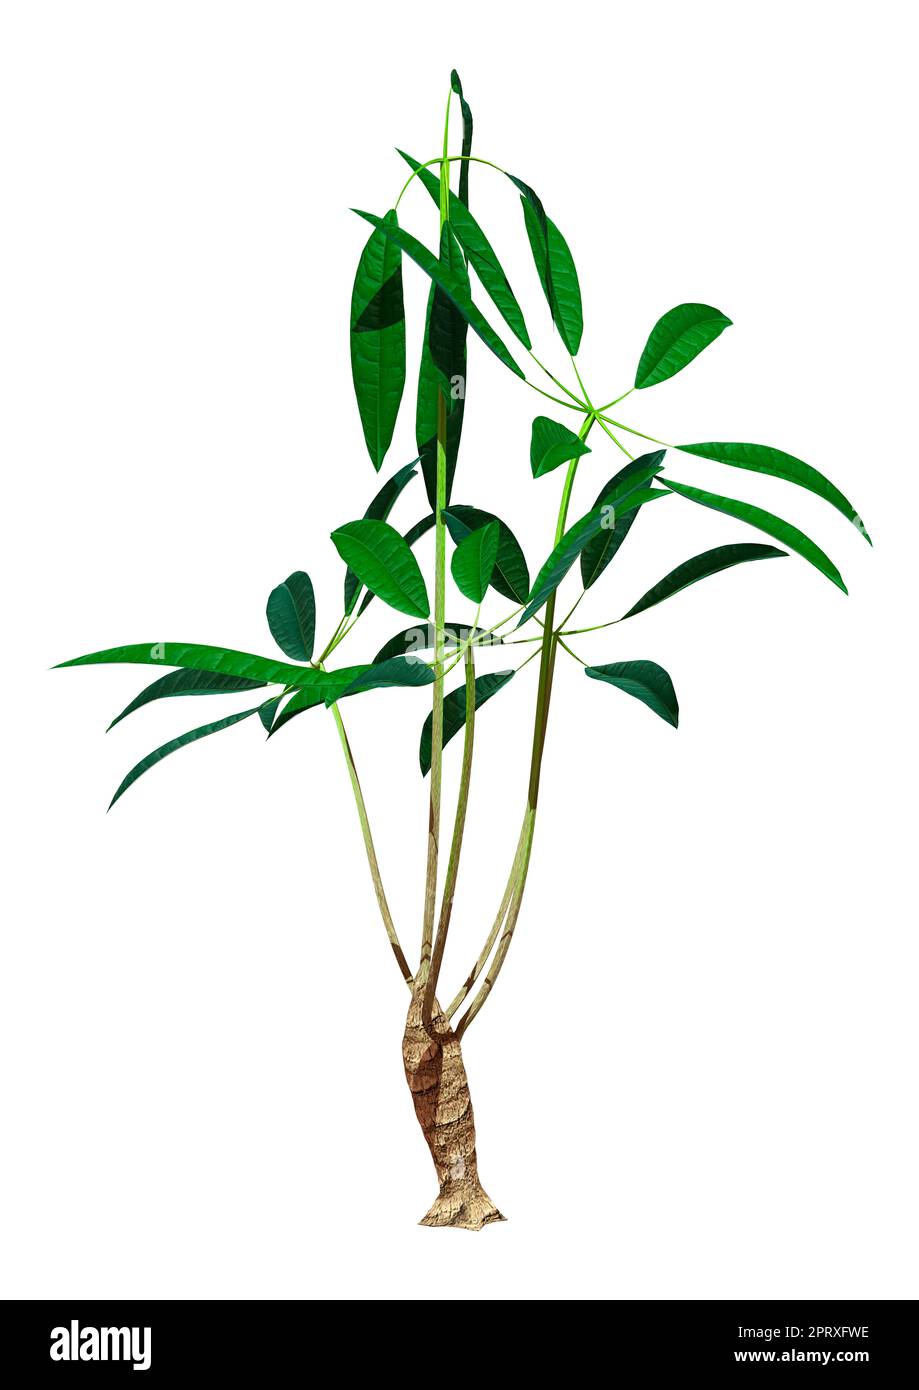 3D rendering of a money tree plant or pachira aquatica isolated on white background Stock Photo